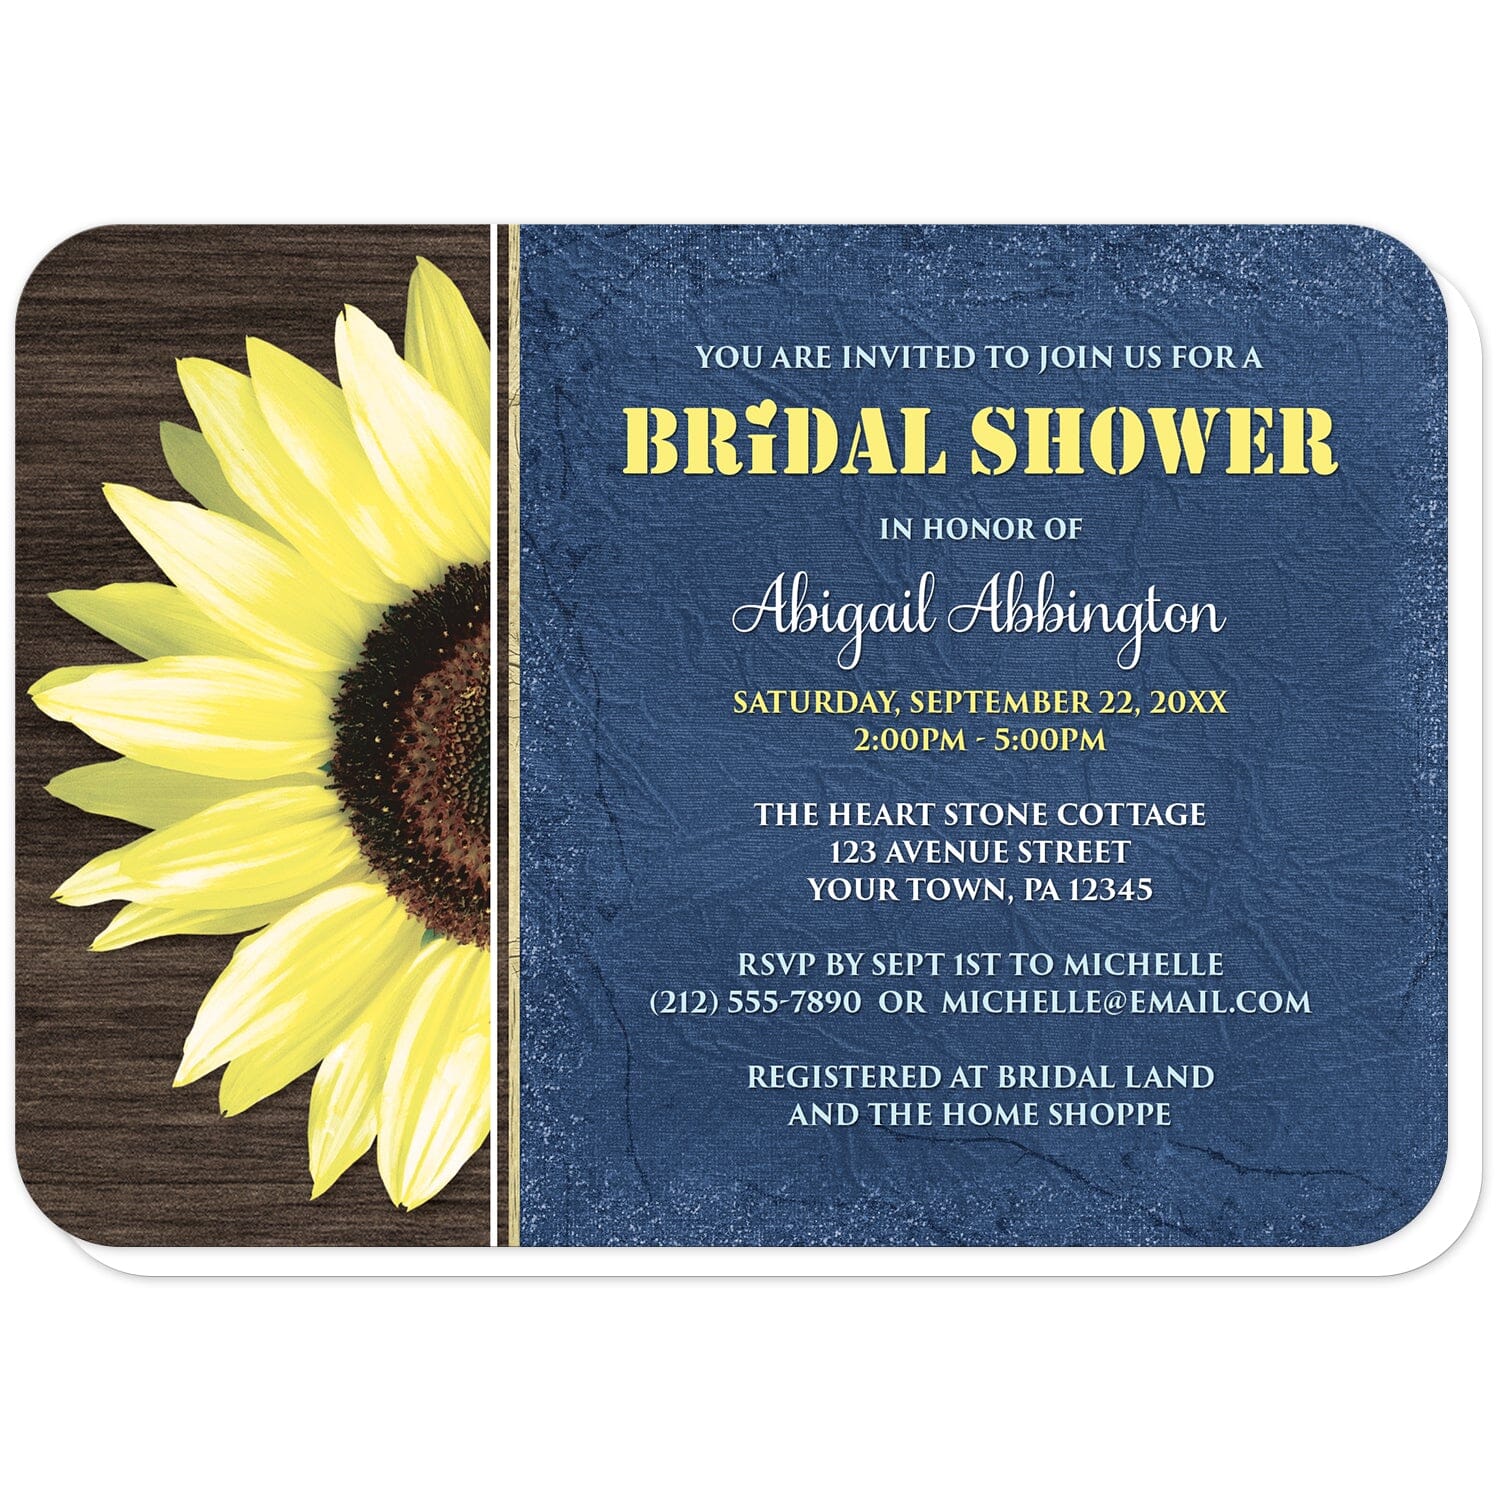 Rustic Sunflower with Blue Bridal Shower Invitations (with rounded corners) at Artistically Invited. Country-inspired rustic sunflower with blue bridal shower invitations featuring a vibrant bright yellow sunflower over a textured dark brown wood design along the left side. Your personalized bridal shower celebration details are custom printed in yellow and white over a tattered blue cloth illustration to the right of the sunflower.